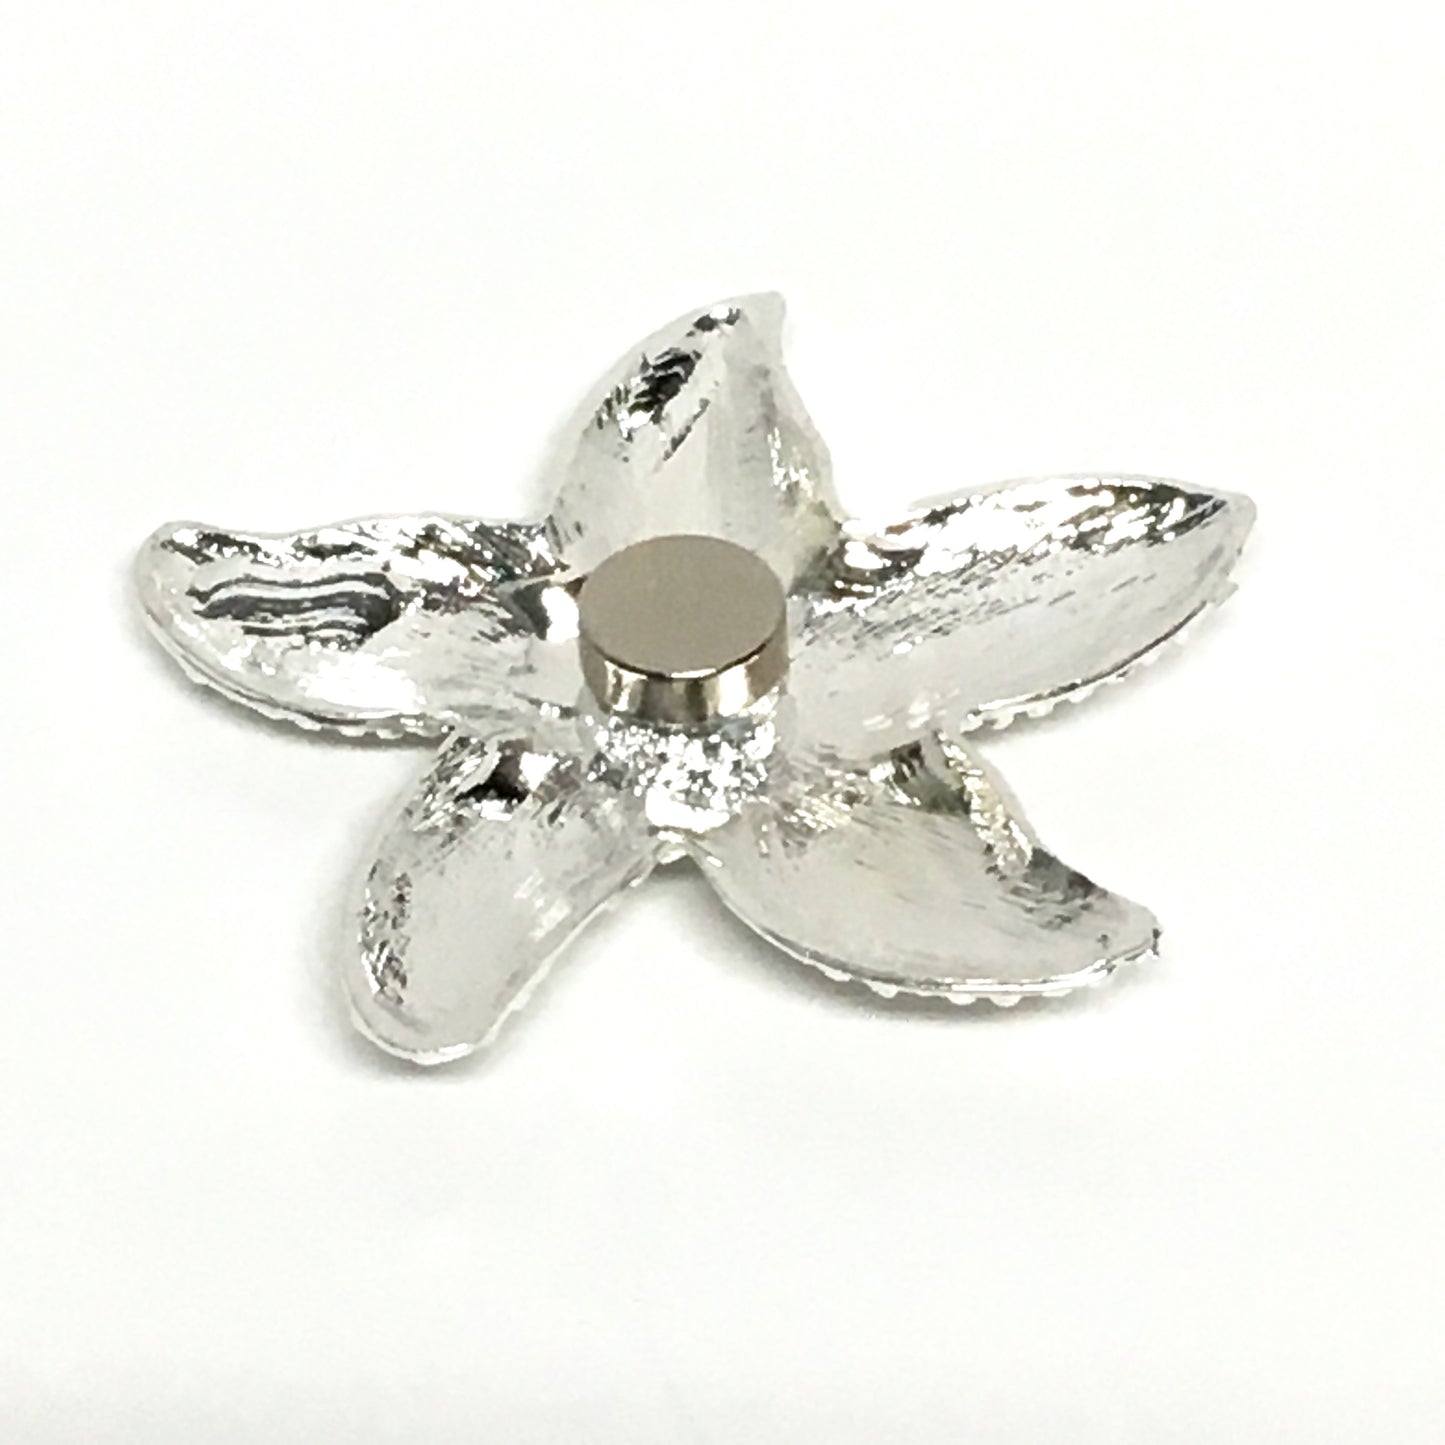 Starfish Candle Magnet - magnet - silver starfish